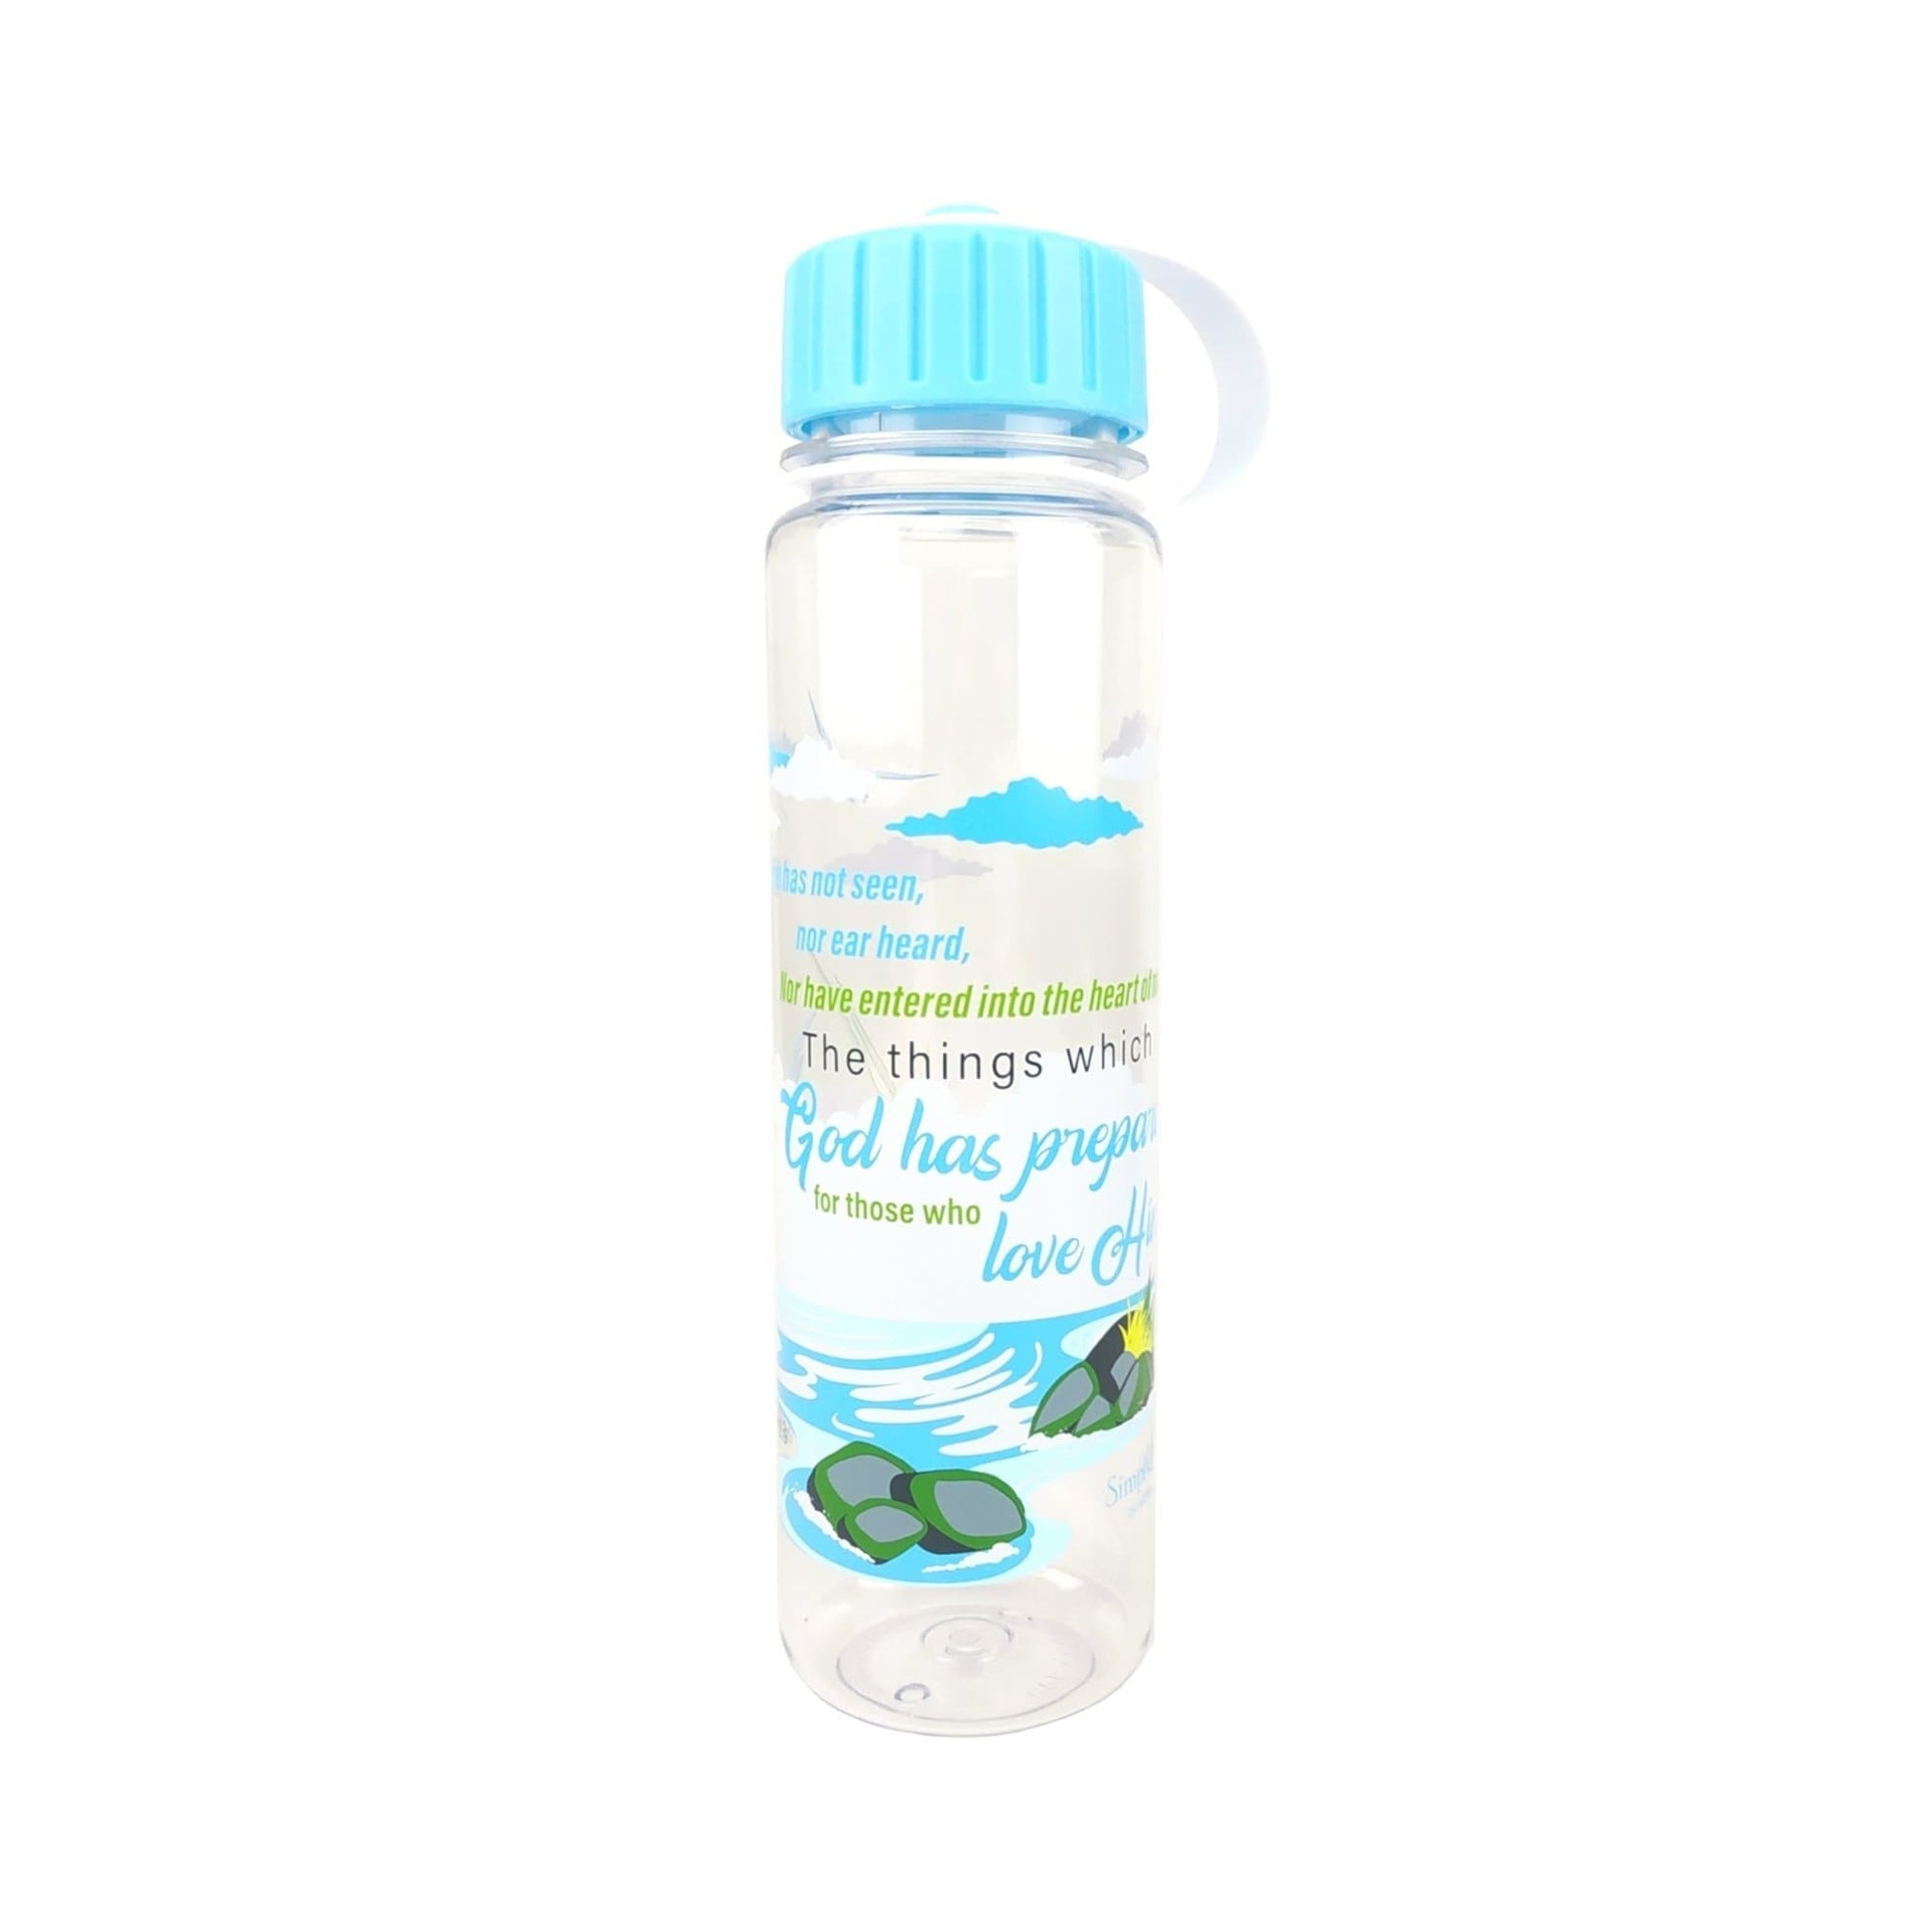 No eye has seen - Simply Life - 600ml Bottle with Screw Lid - Simply Life